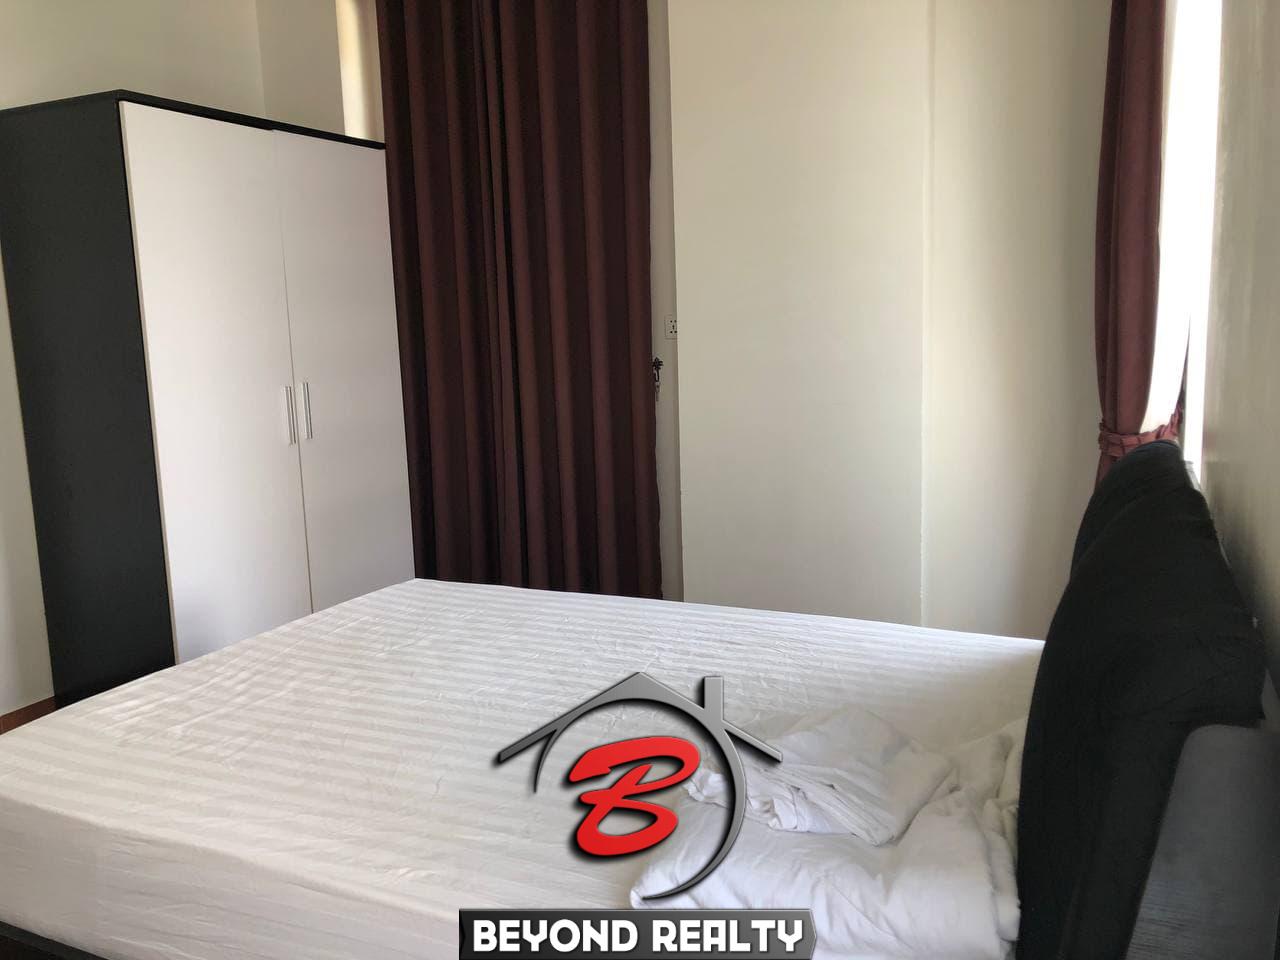 the bedroom of the 1br apartment for rent in Tonle Bassac Phnom Penh Cambodia